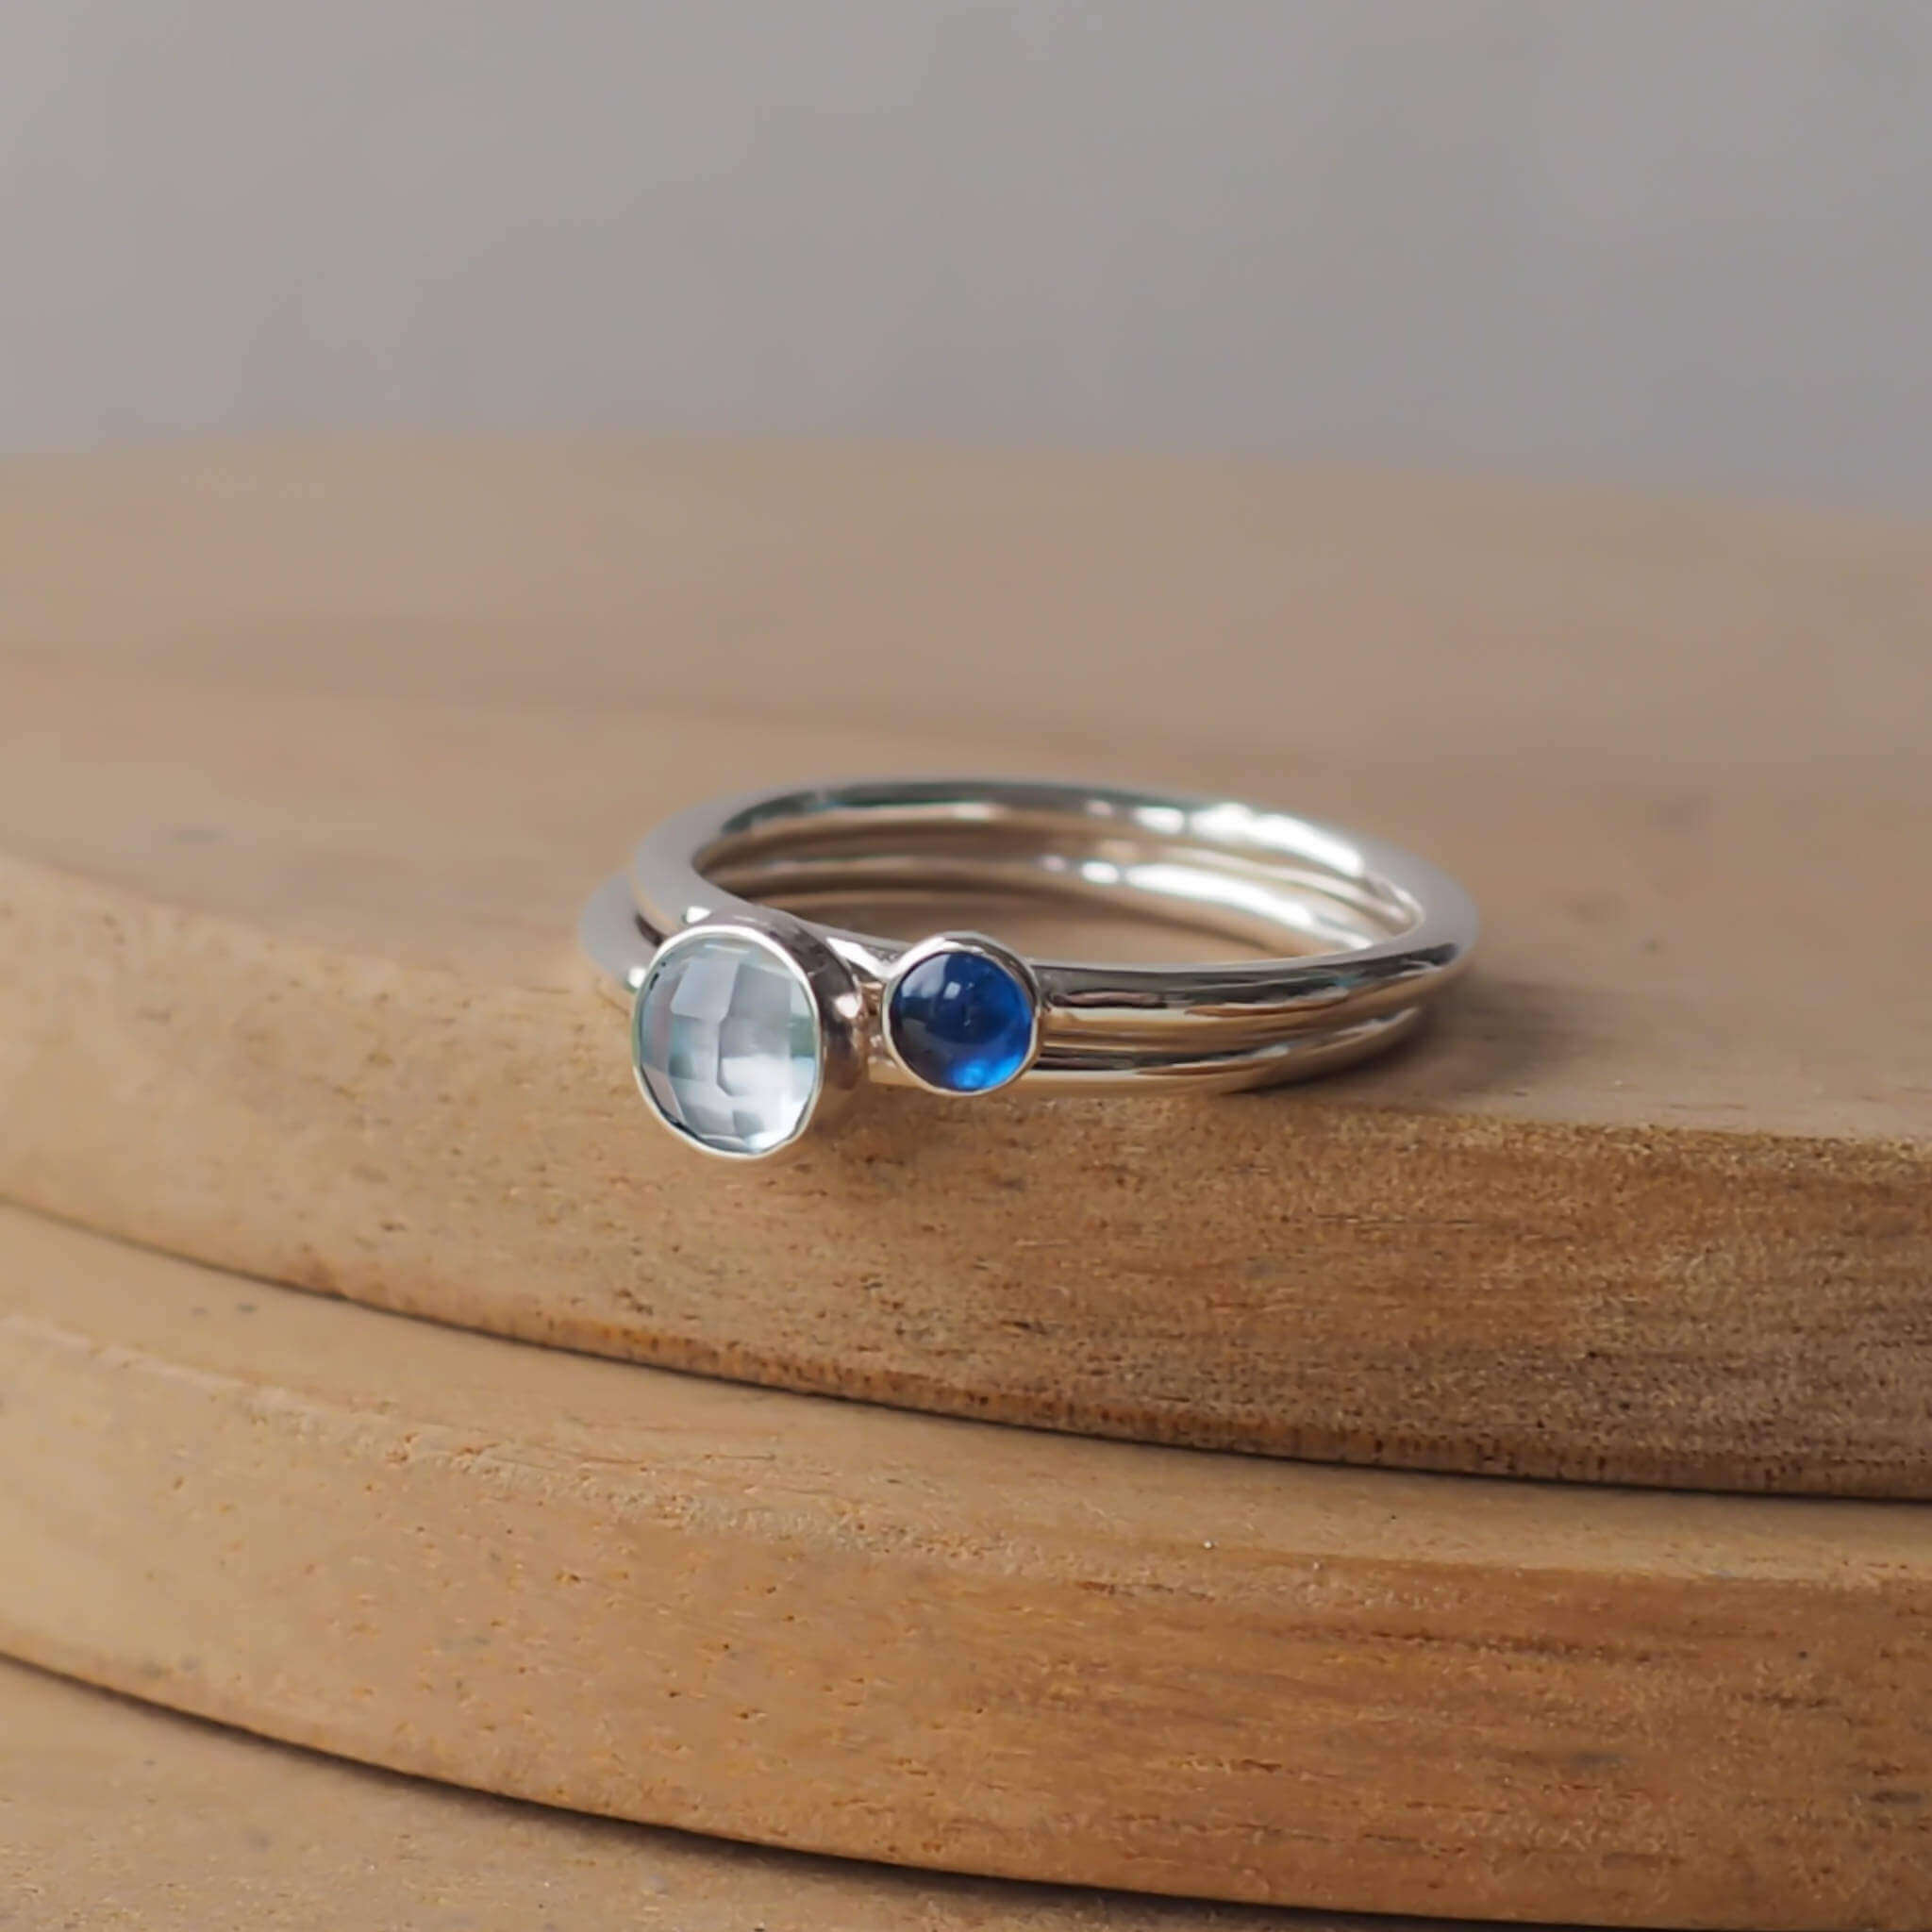 Two Birthstone Ring set with Blue Topaz and Lab Sapphire to mark March and September Birthdays. The three rings are made with Sterling Silver and a 5mm blue round cabochon, with a further rings with 3mm round gem in a blue lab sapphire . Handmade in Scotland by maram jewellery